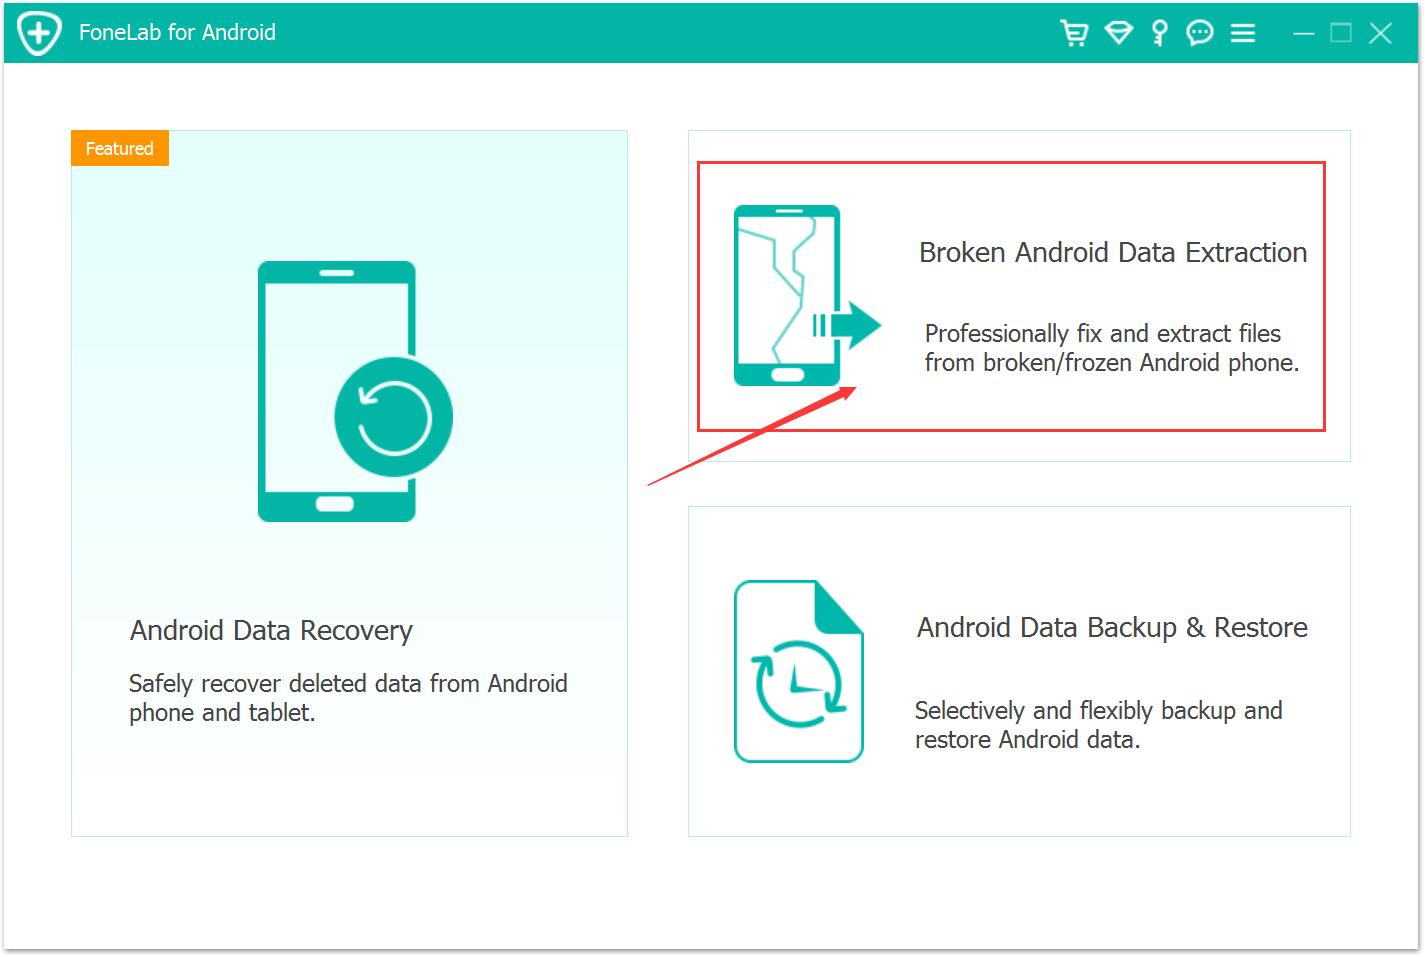 launch broken android data recovery/extraction